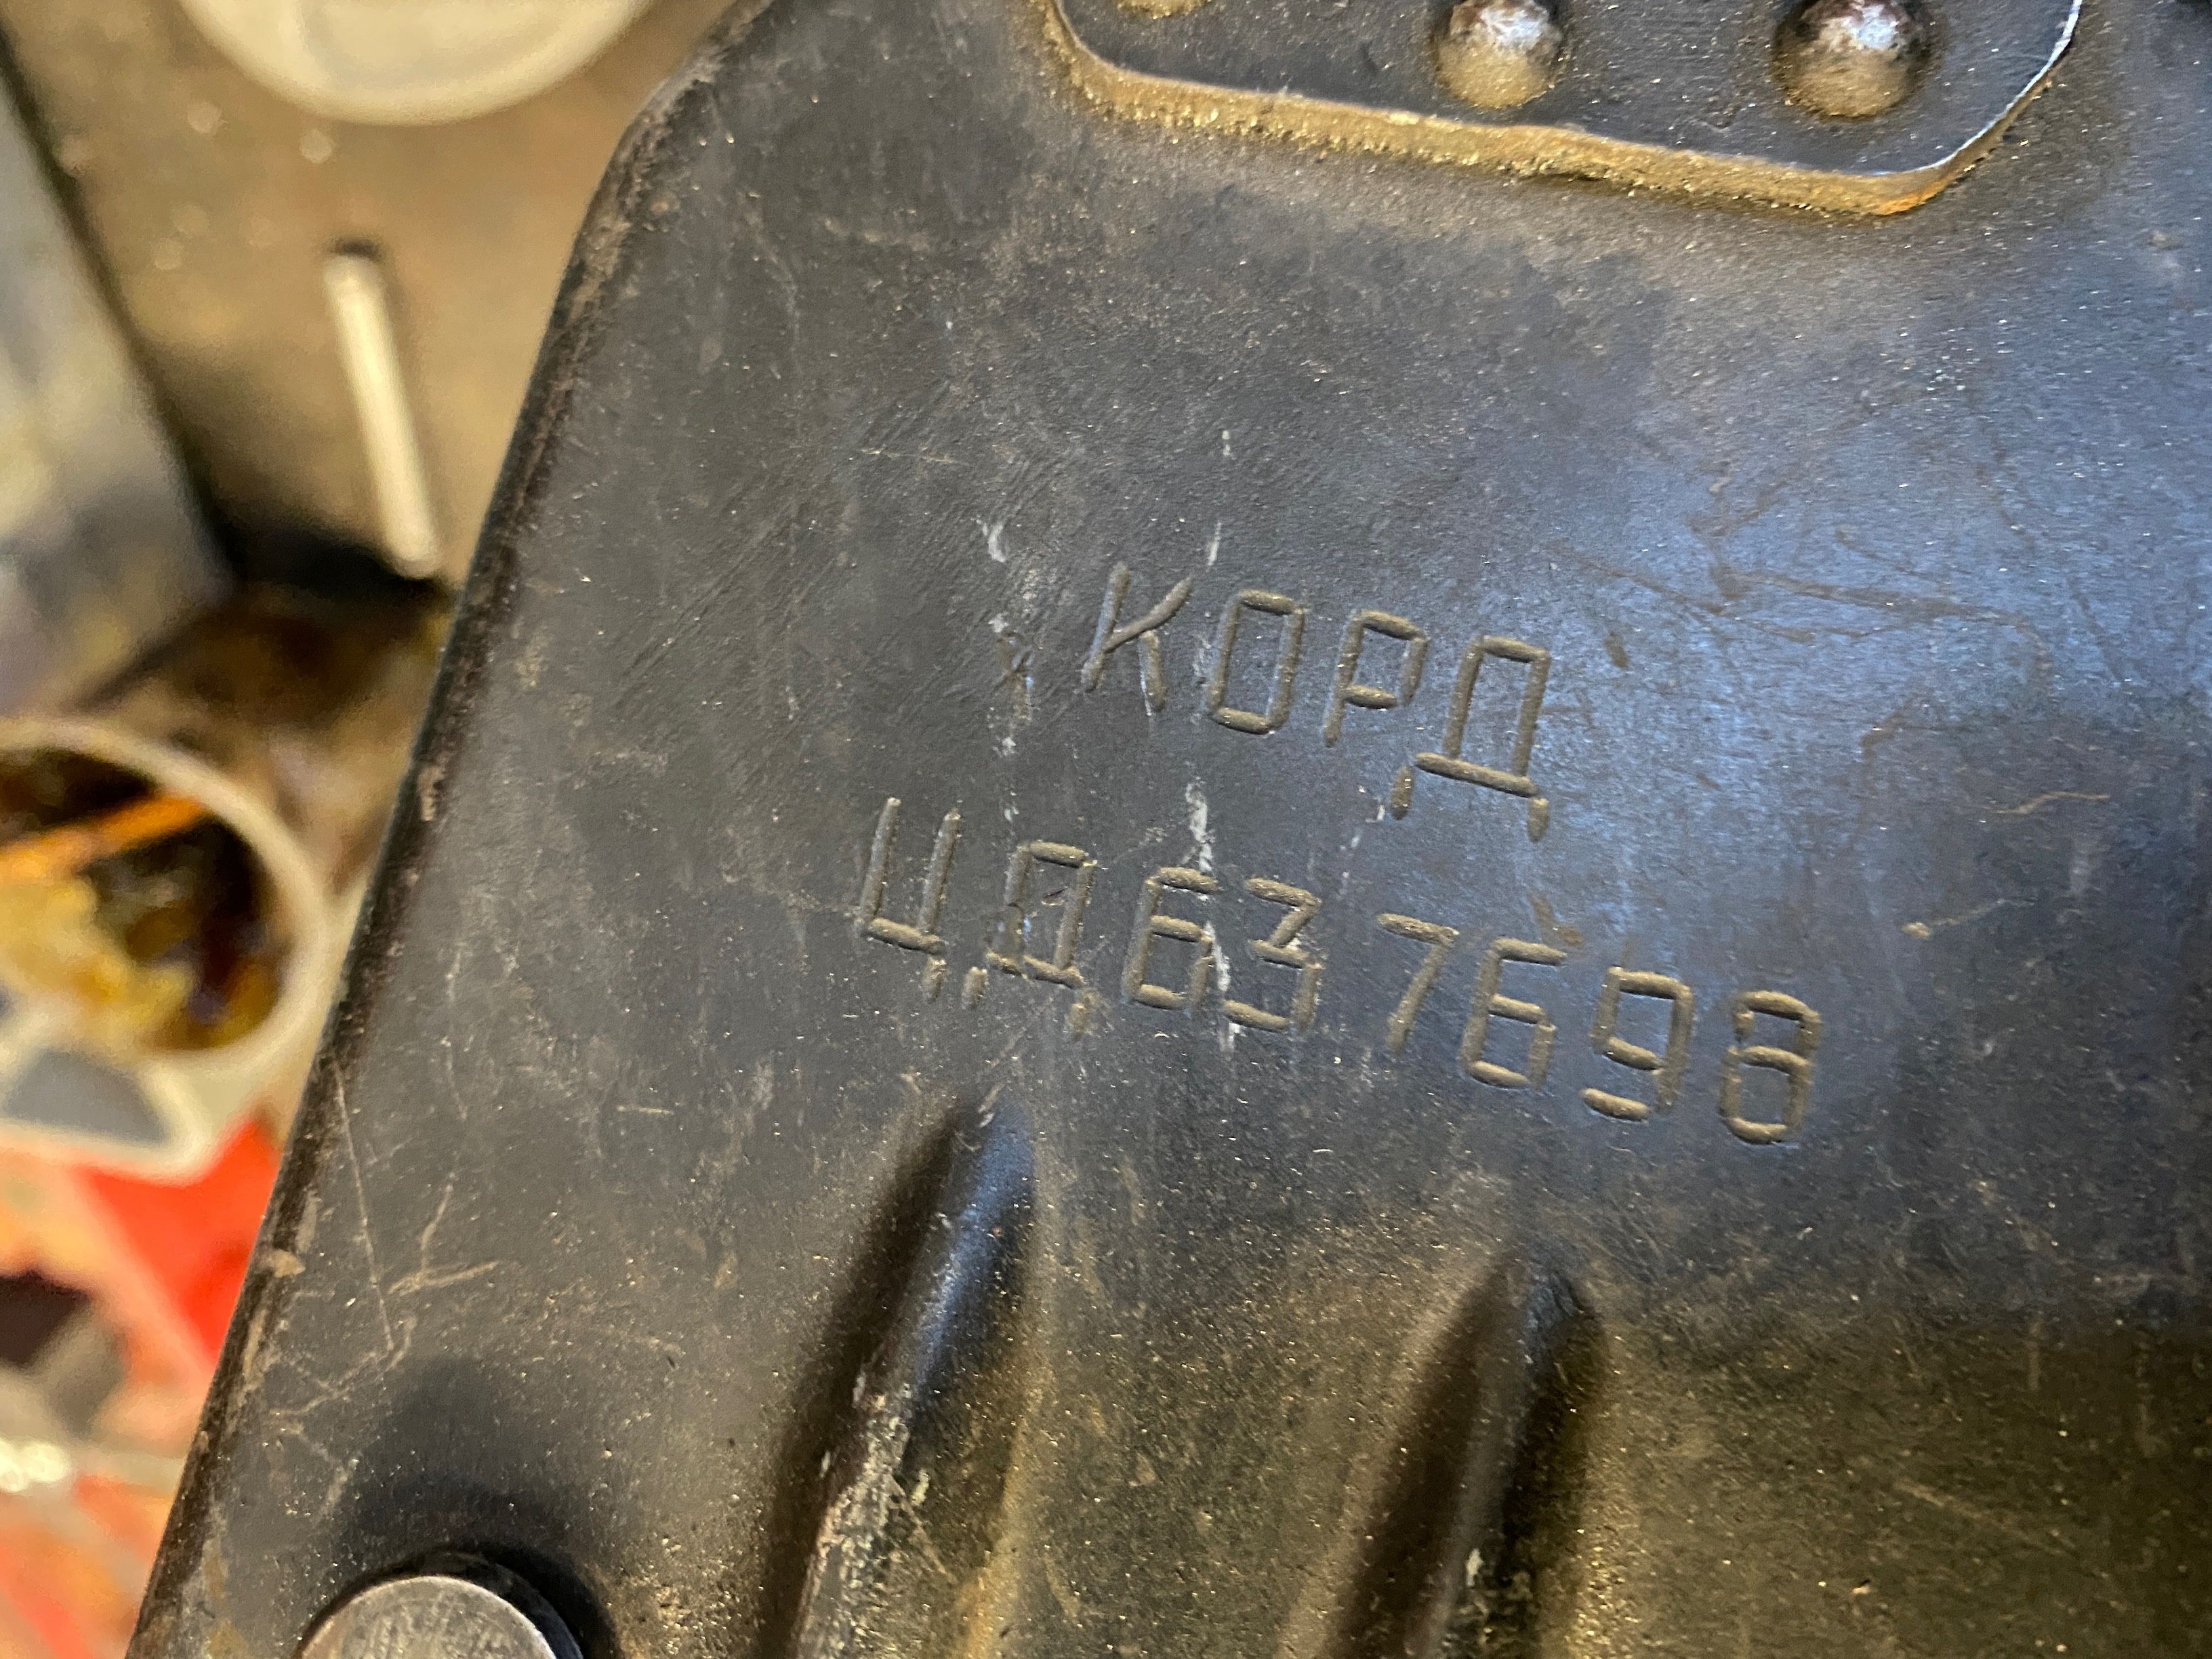 An etching on the back of a Kord machine gun that auto mechanics in Kyiv said was recovered from Russian forces, April 14, 2022.      REUTERS/Sergiy Karazy